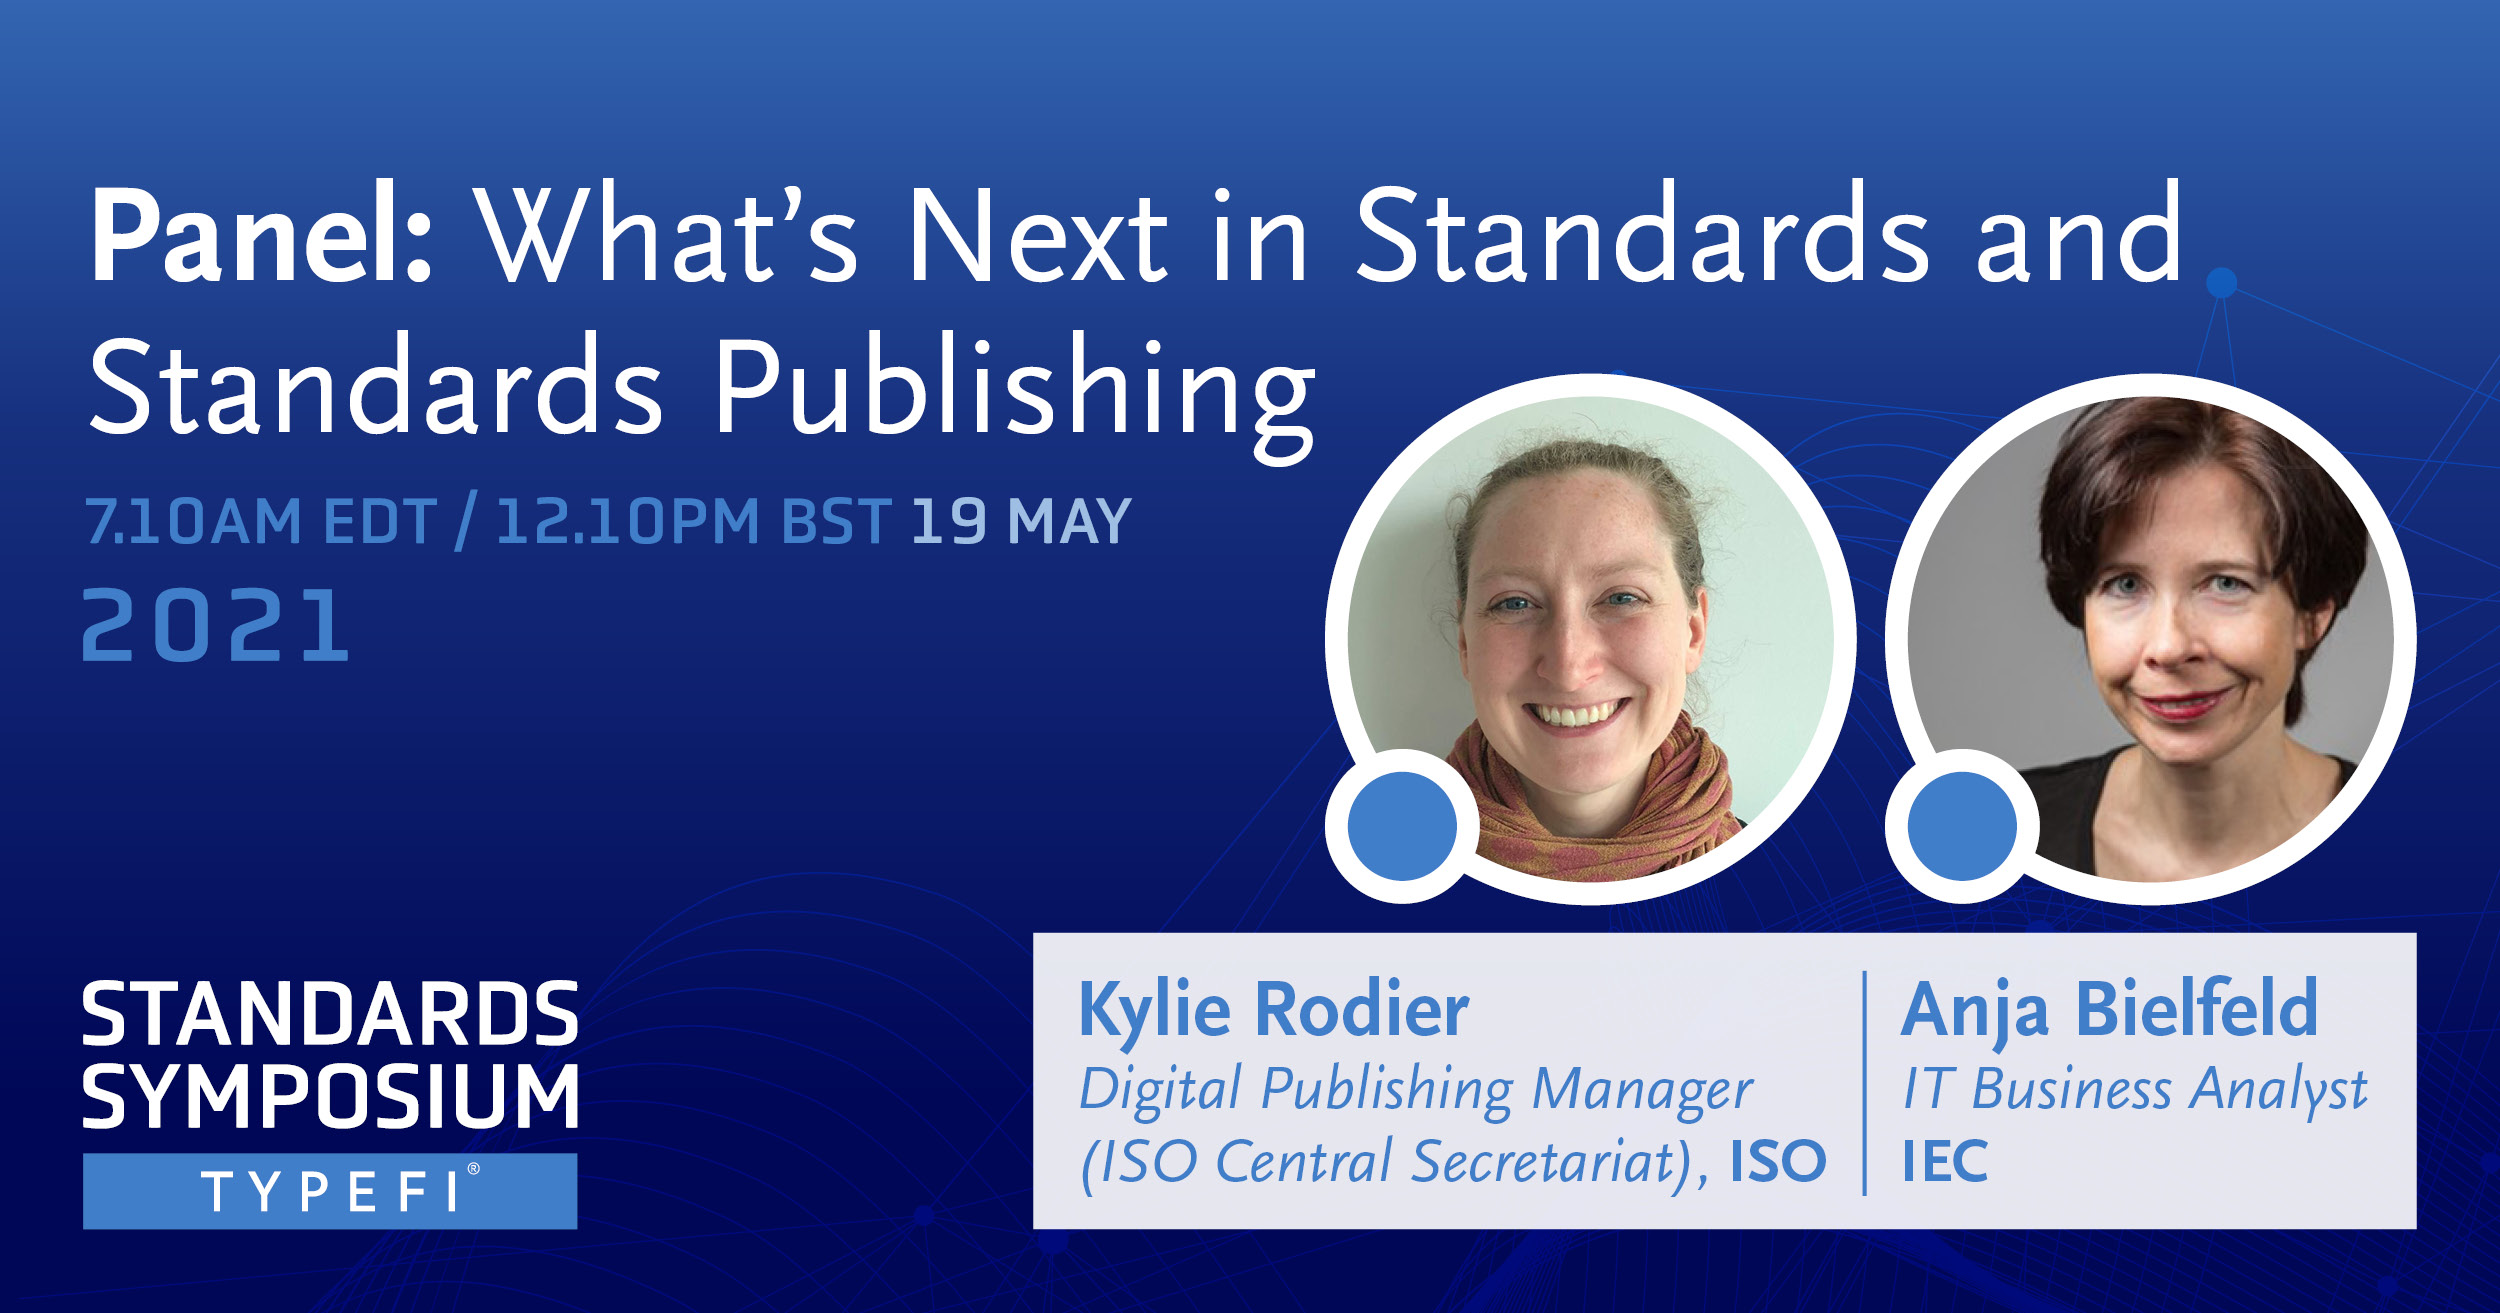 Banners advertising a panel presentation on what's next in standards publishing, featuring Kylie Rodier from ISO and Anja Bielfeld from IEC.